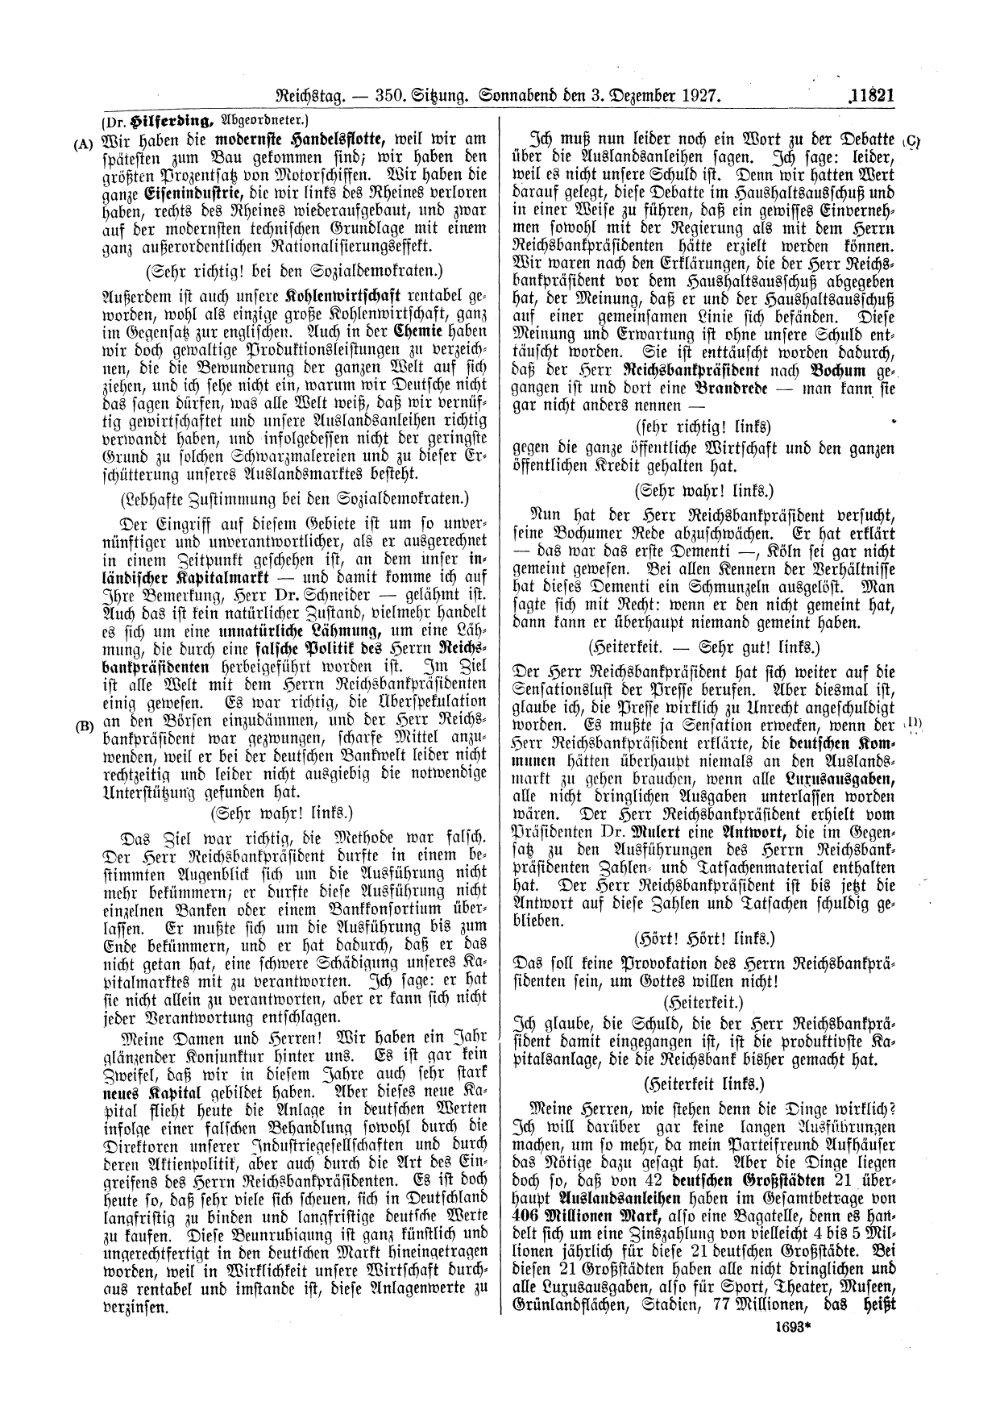 Scan of page 11821